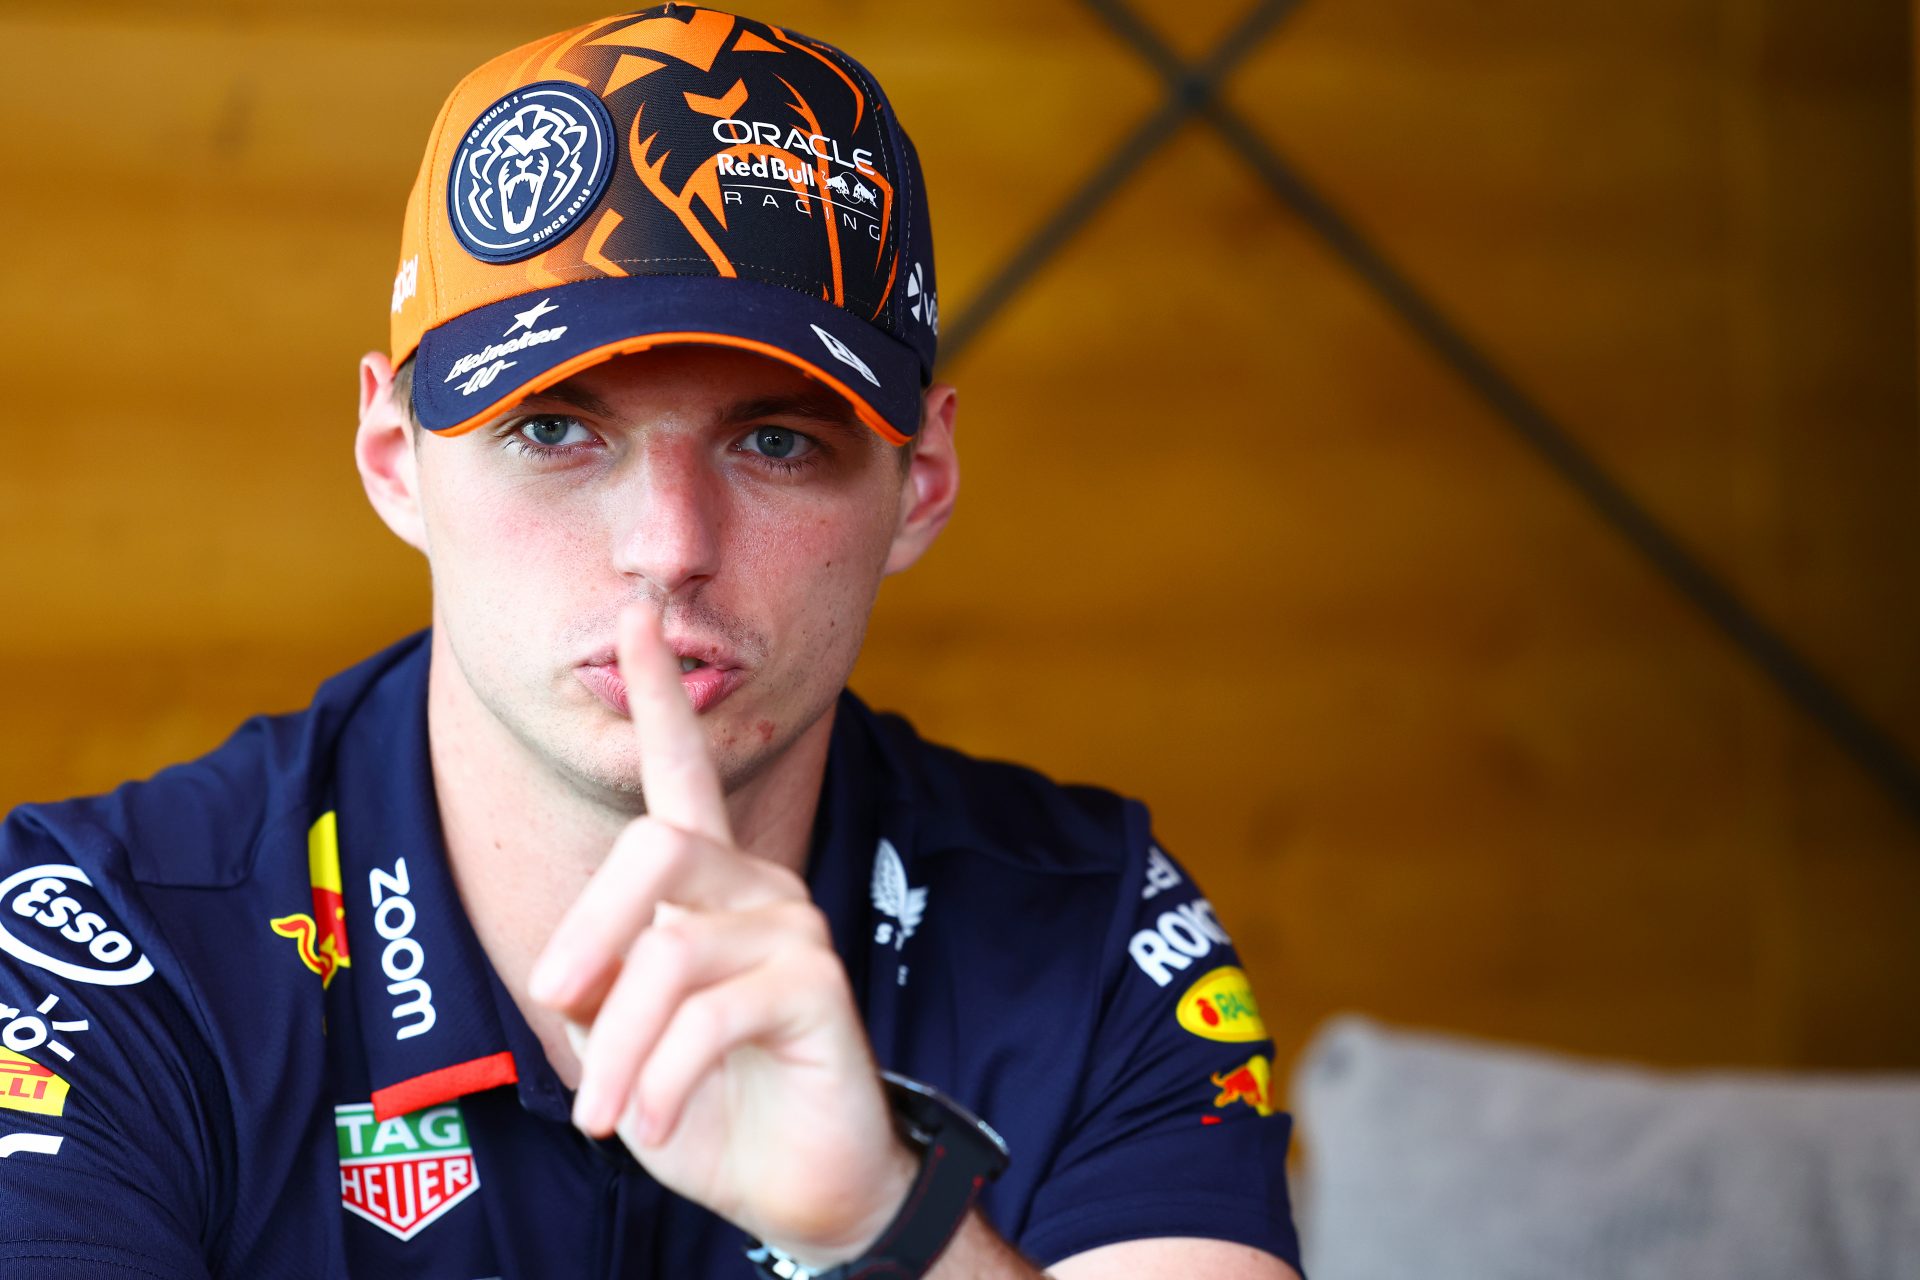 Max Verstappen responds to Hamilton's 'act like a world champion' dig at the Belgium GP